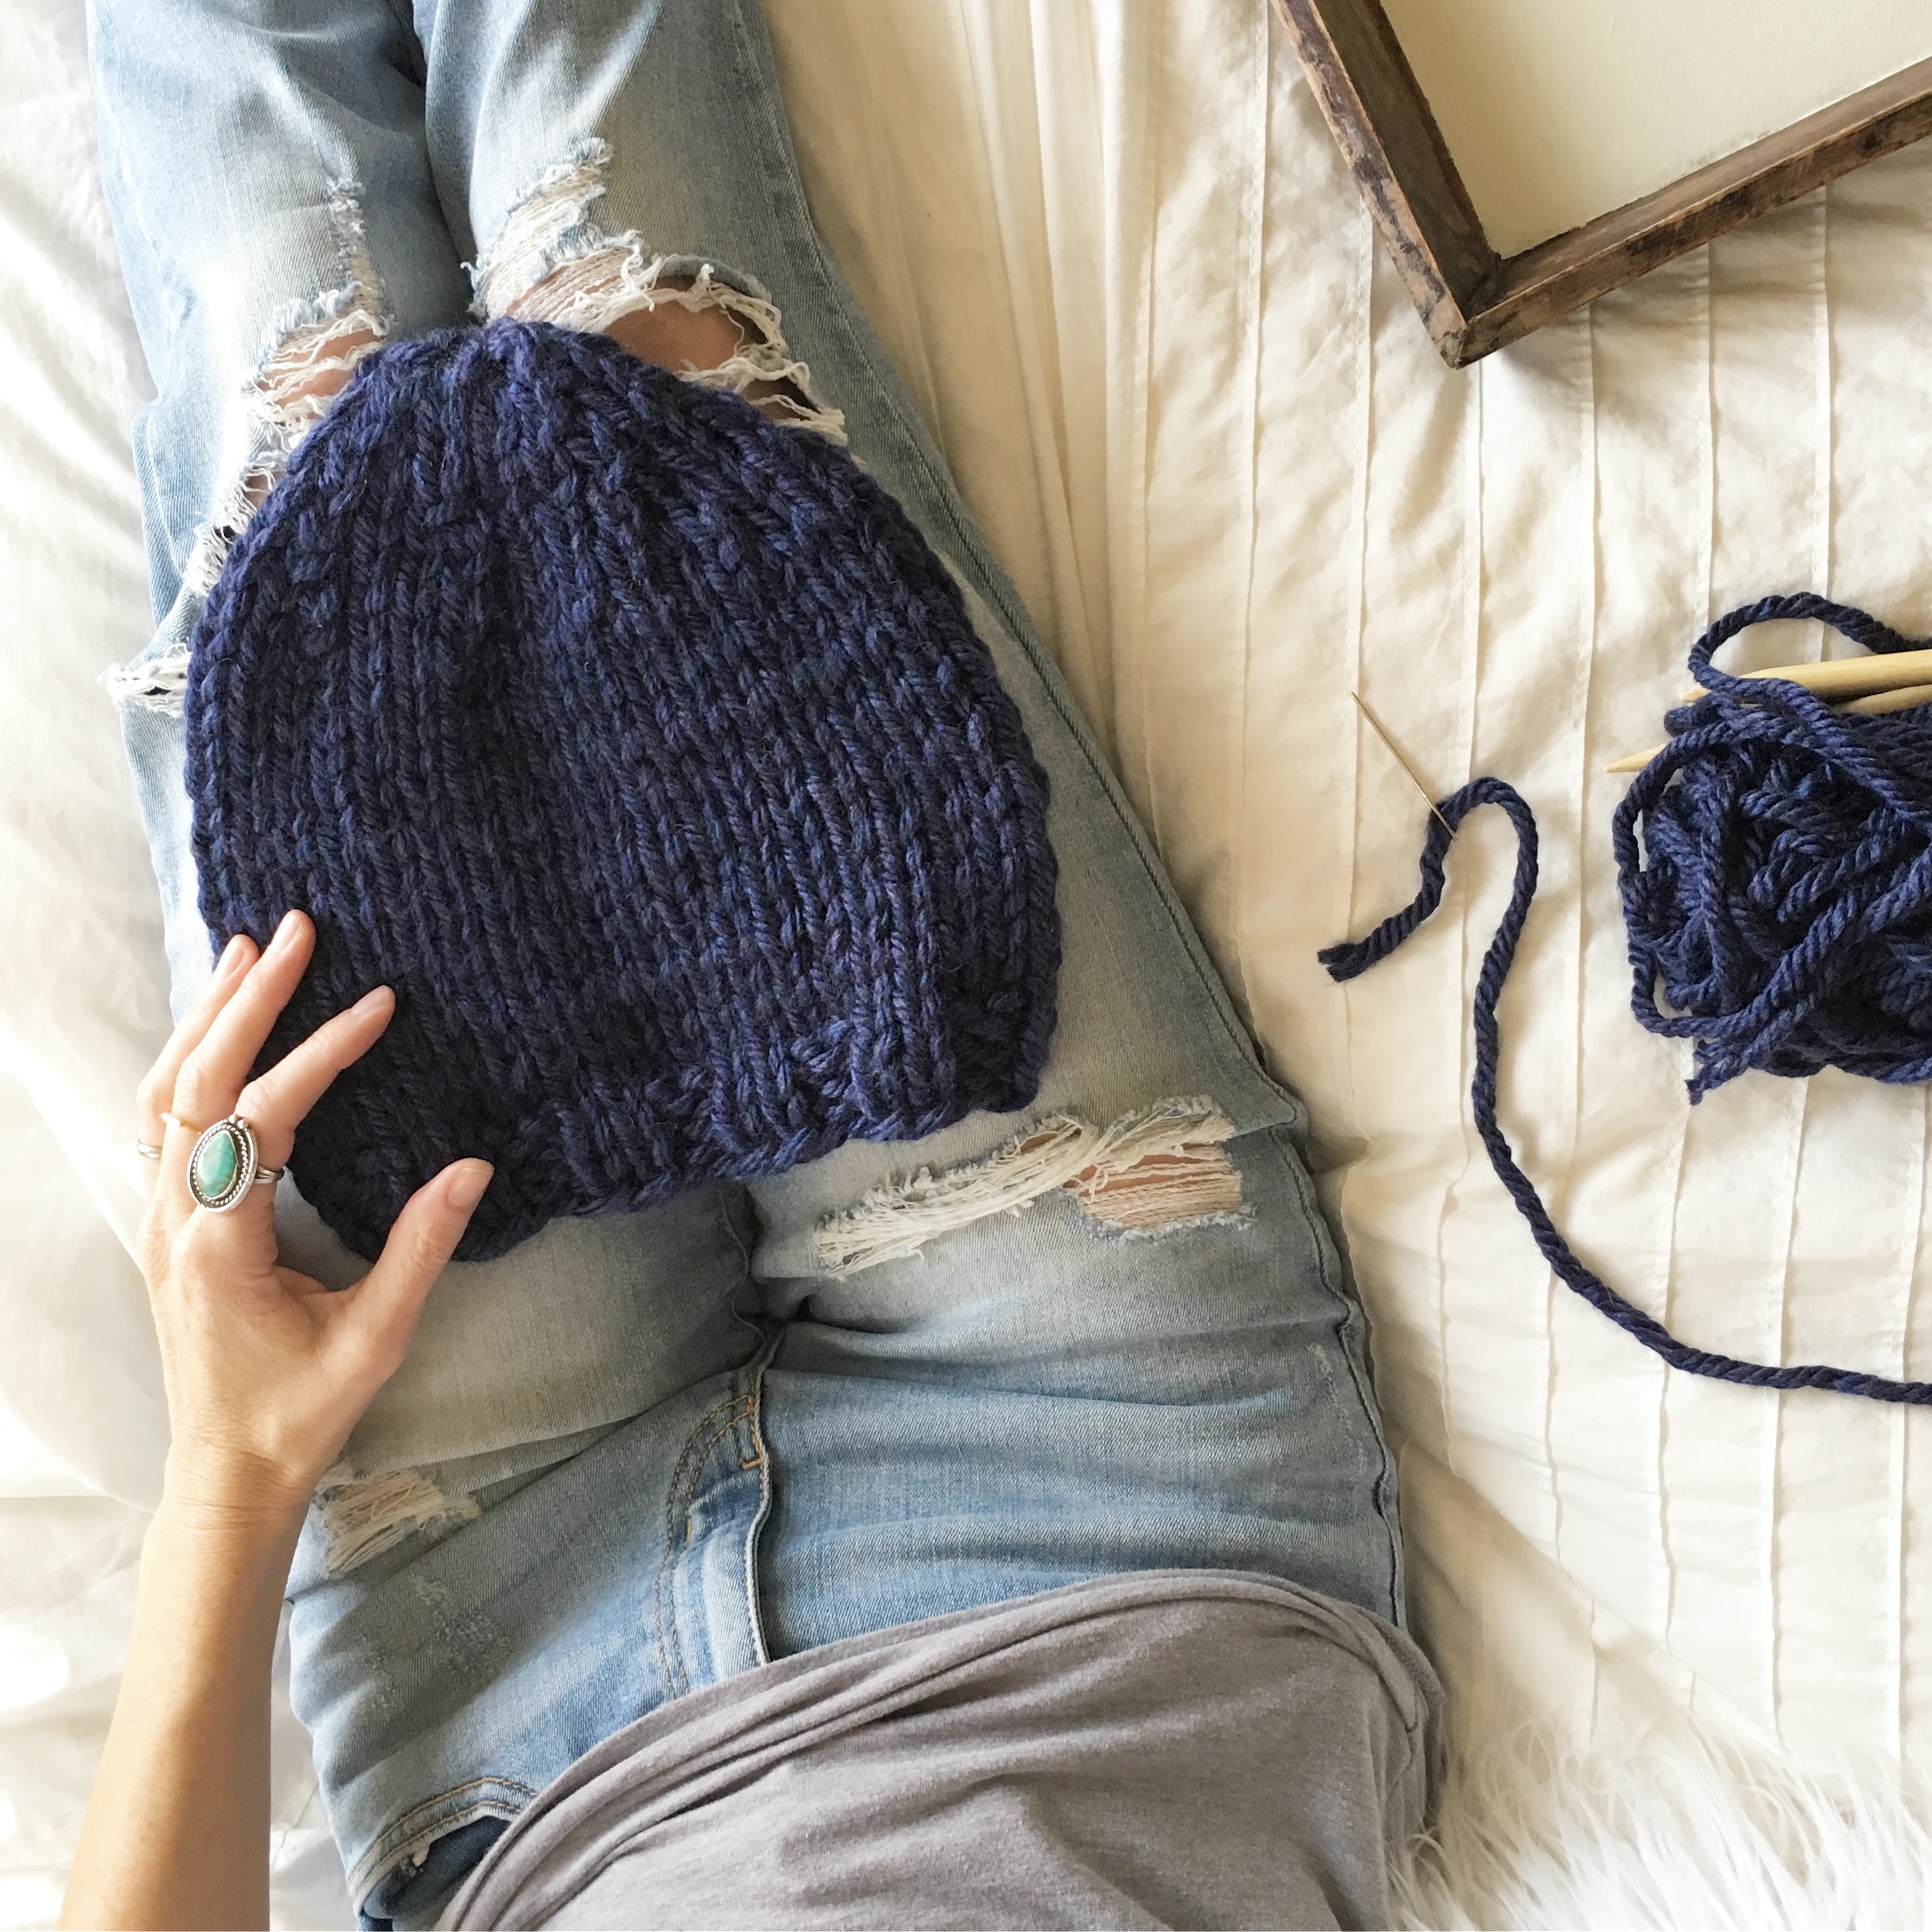 mindfulknits Learn to Knit Kit- Knit a Chunky Beanie- Knitting Needles,  Yarn Needle & Acrylic Chunky Bulky Knitting Yarn– Malai- Beginners Basic  Knitting Supplies Set for Relaxation & Stress Relief : 